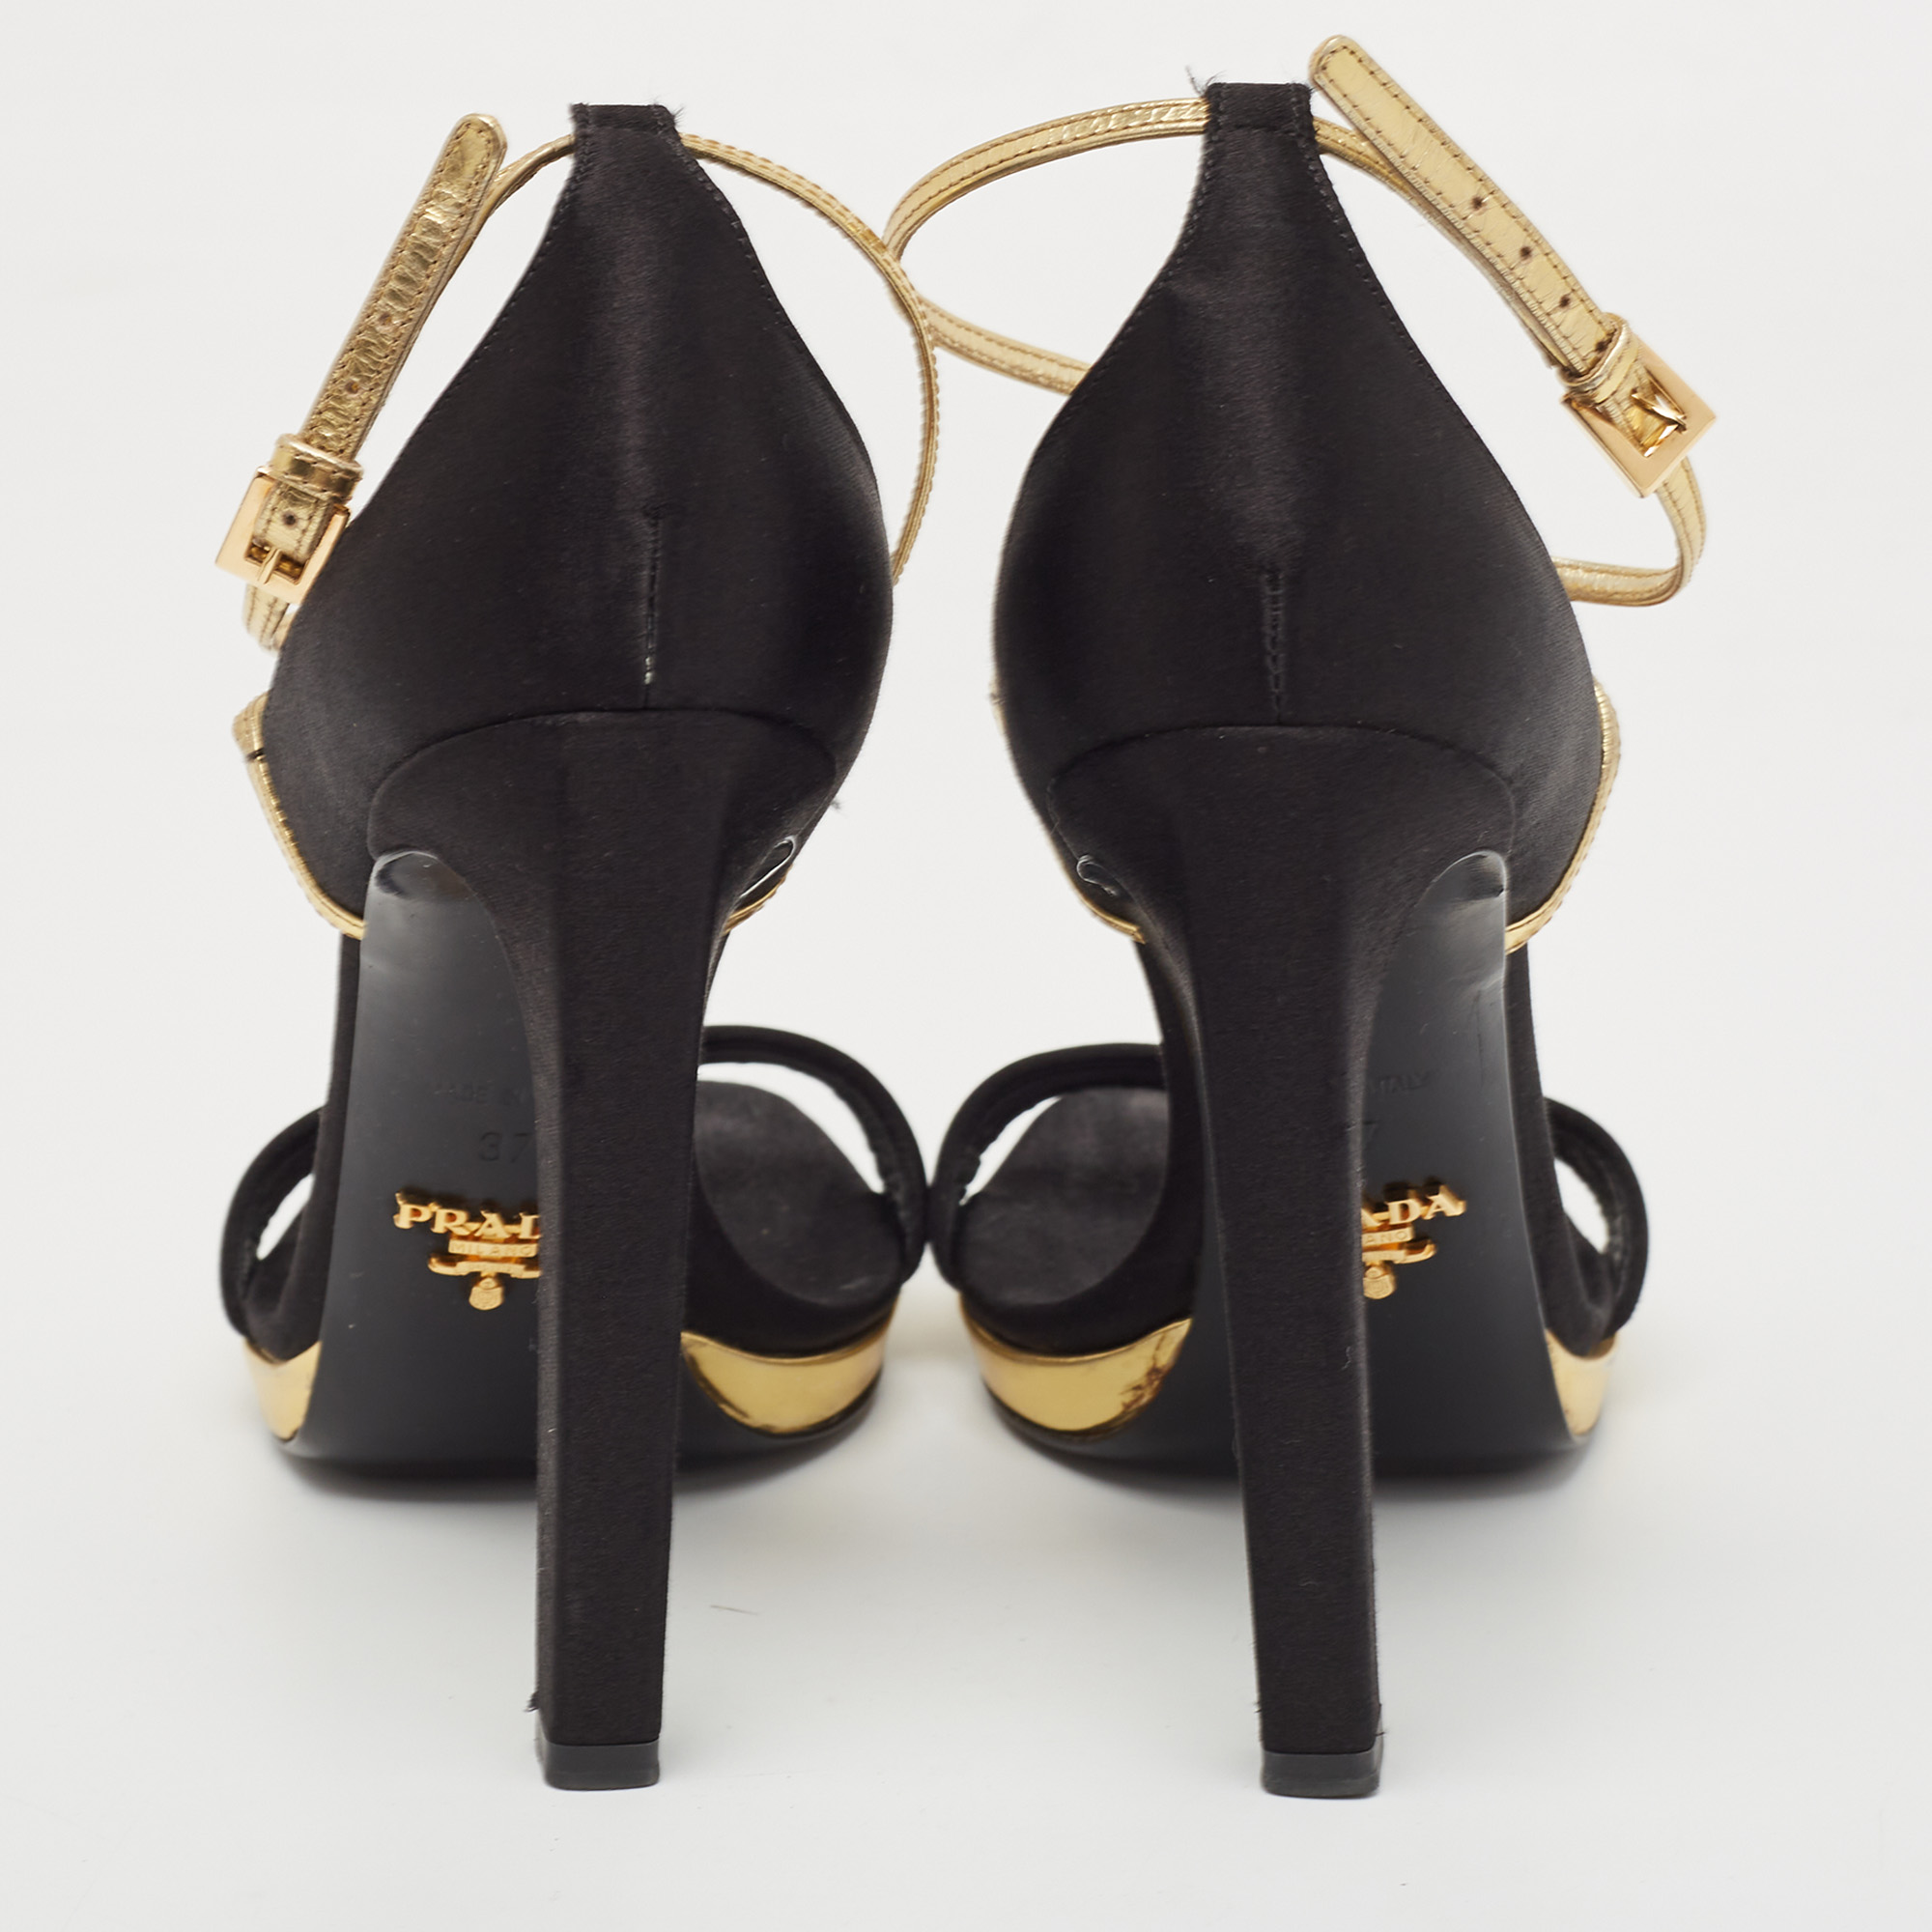 Prada Black/Gold Satin And Leather Criss Cross Ankle Strap Sandals Size 37